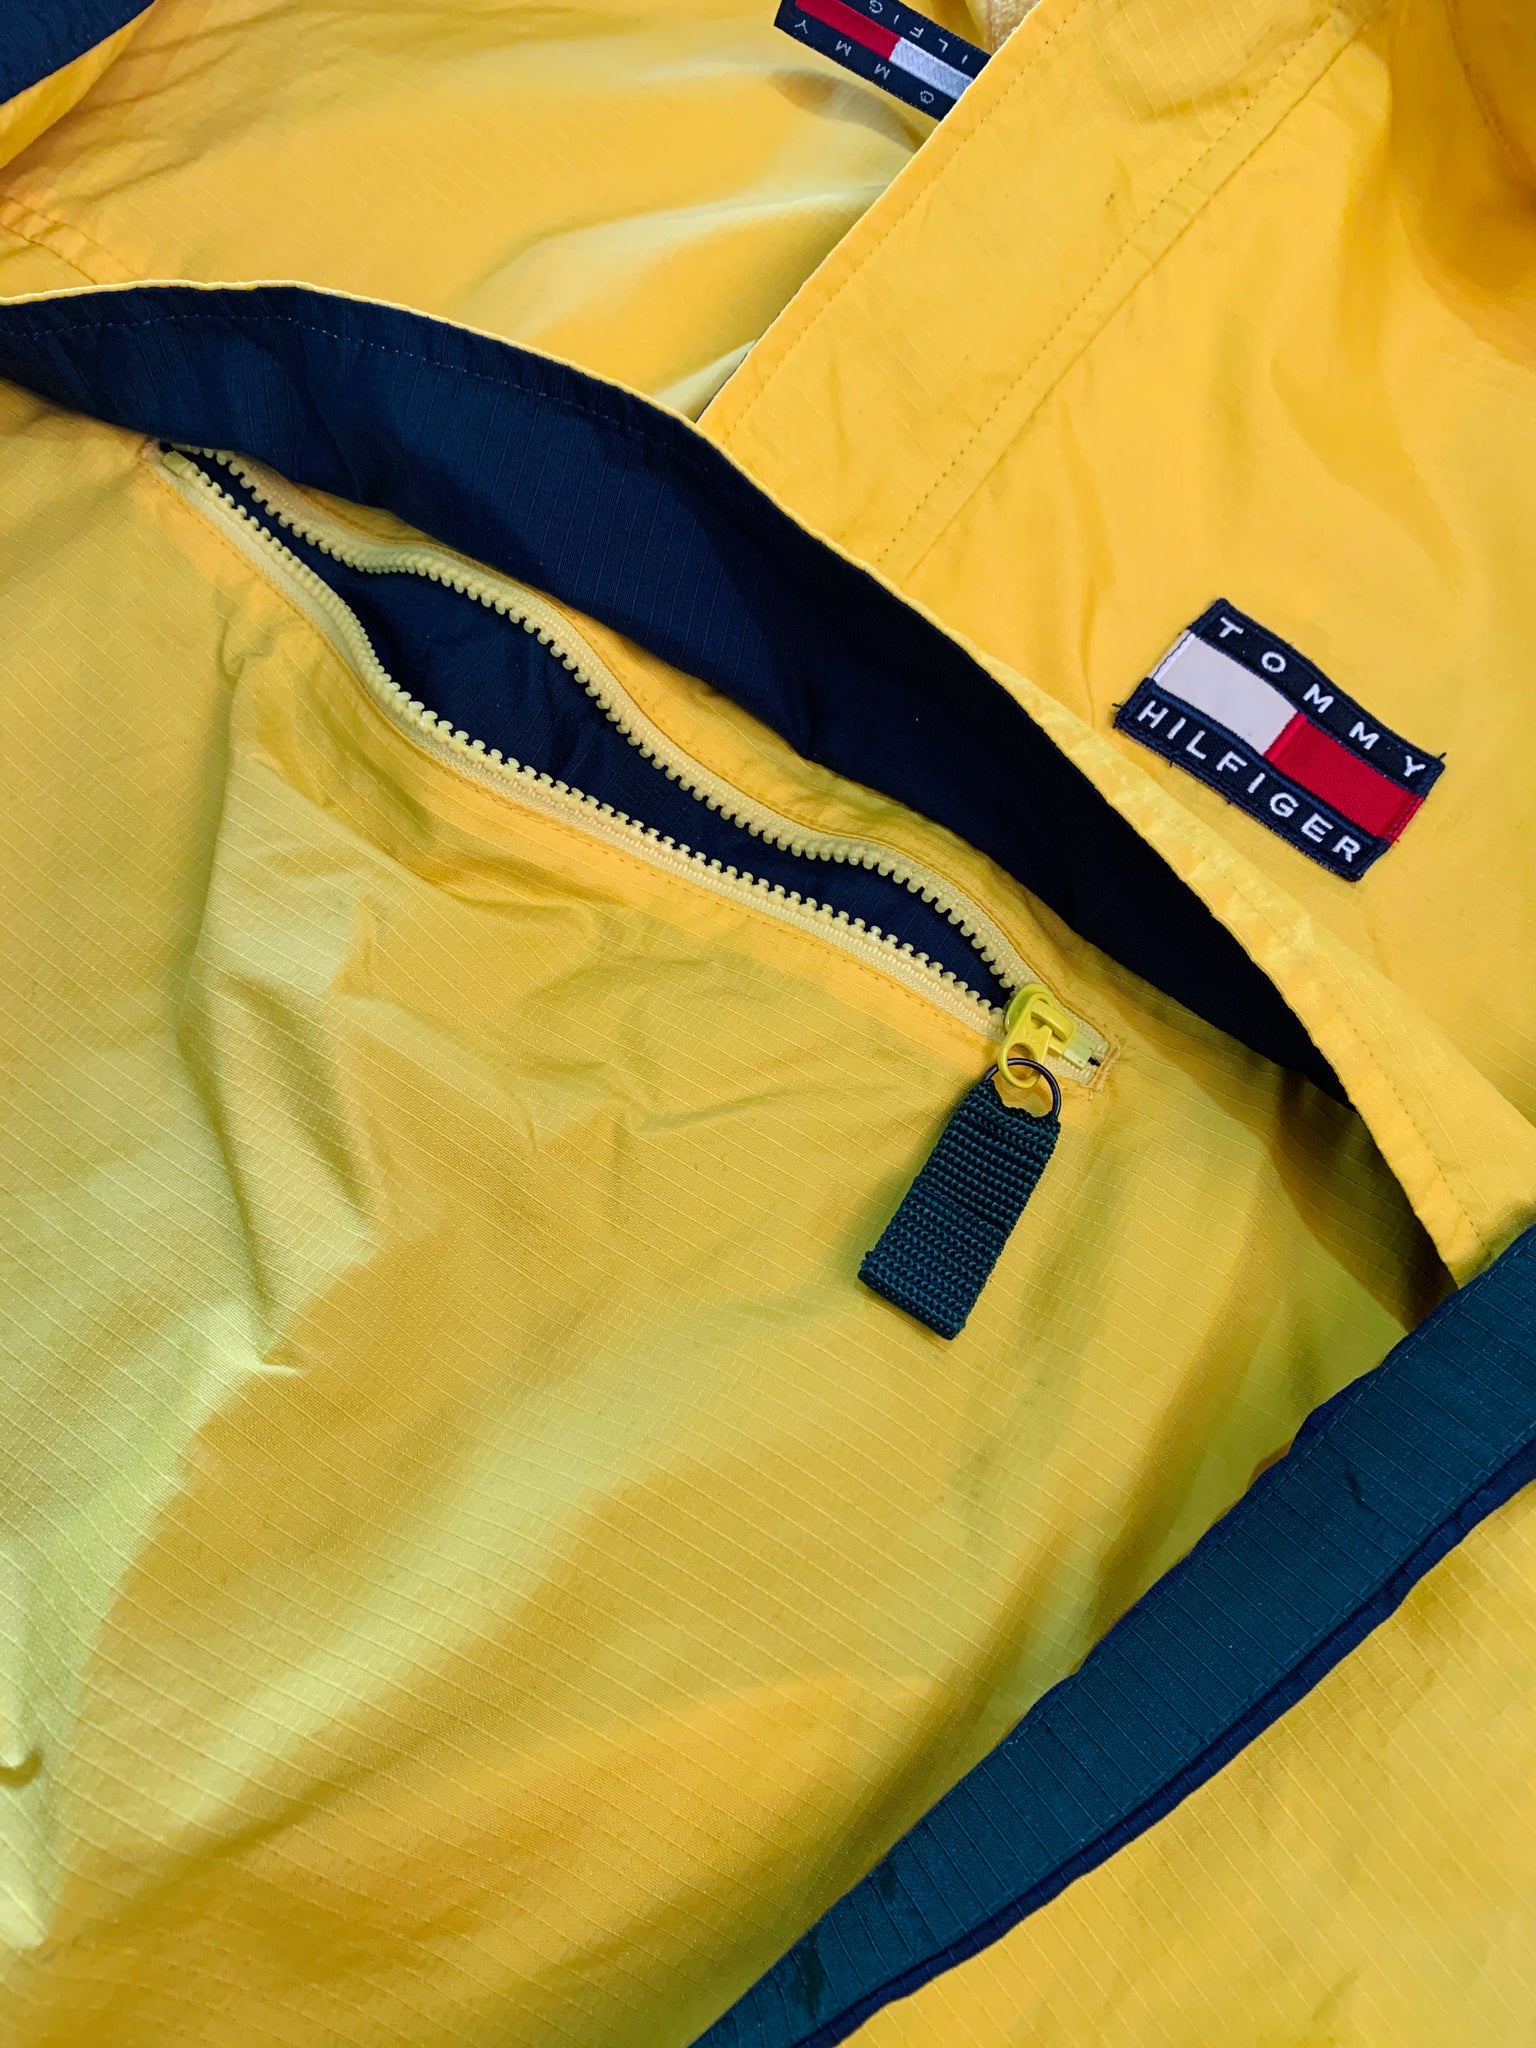 Vintage Tommy Hilfiger Jacket 2XL Yellow – Grp Fly